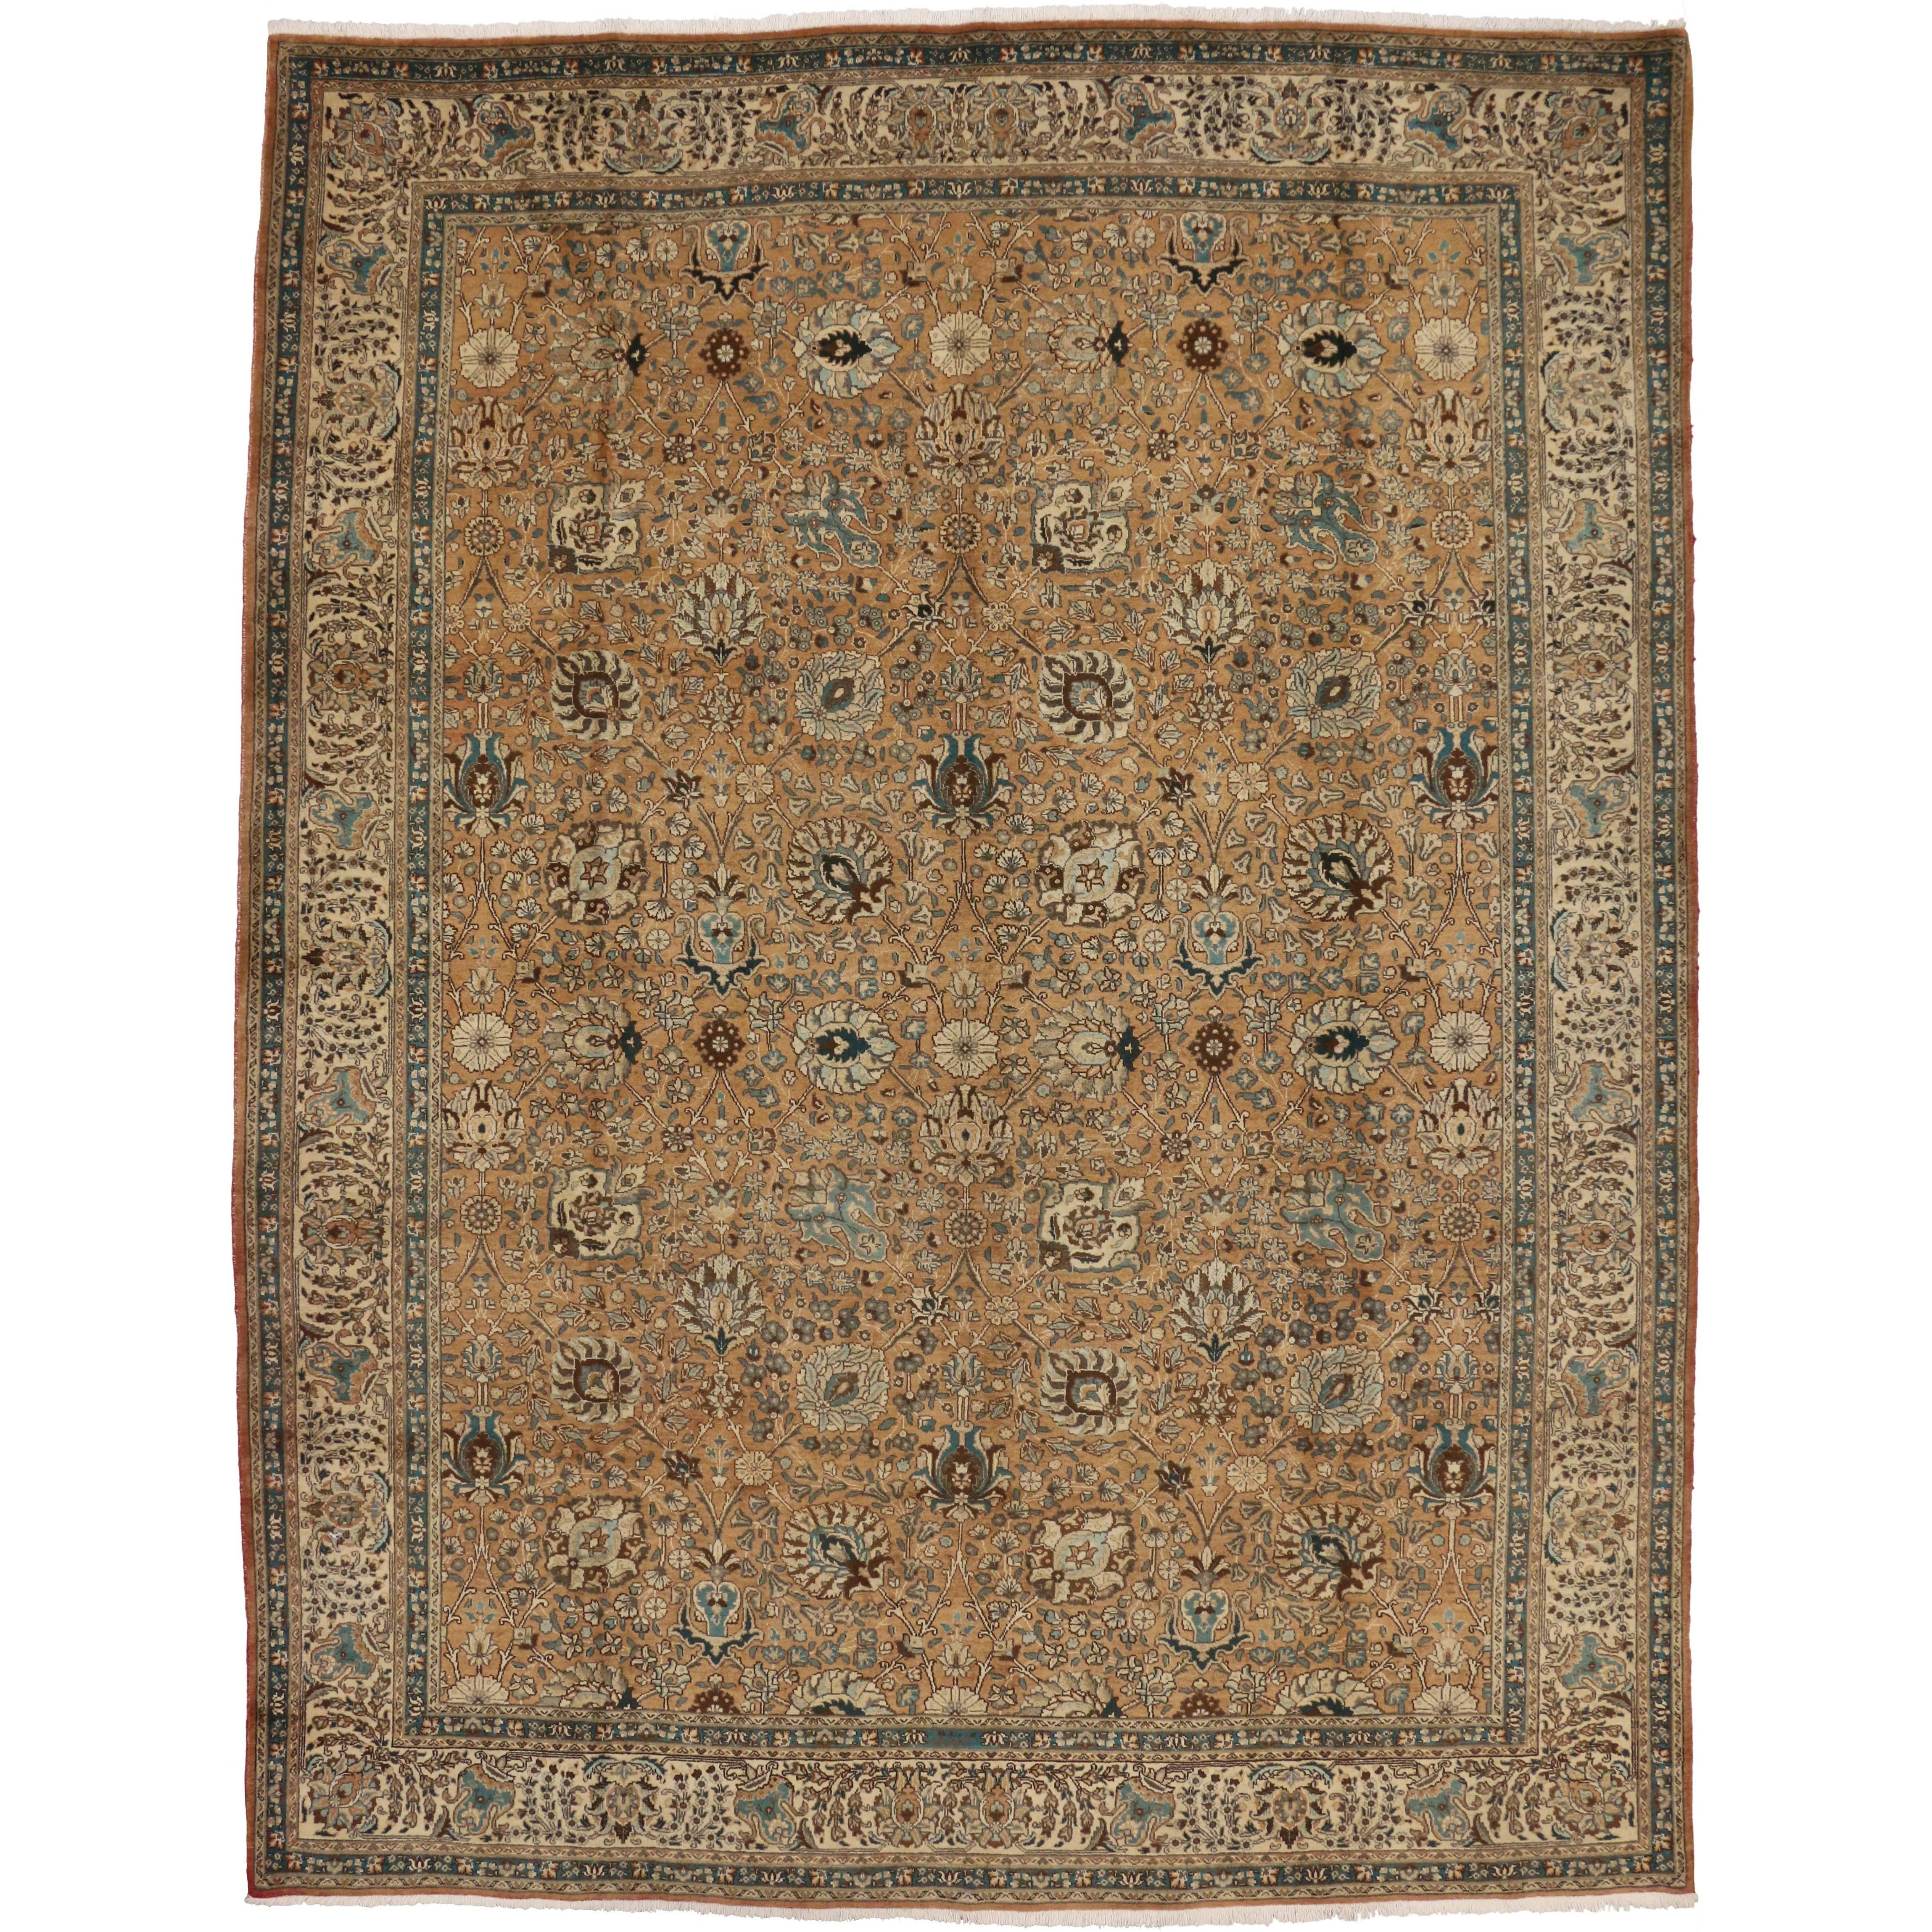 Vintage Persian Tabriz Rug with Traditional Style in Light Colors